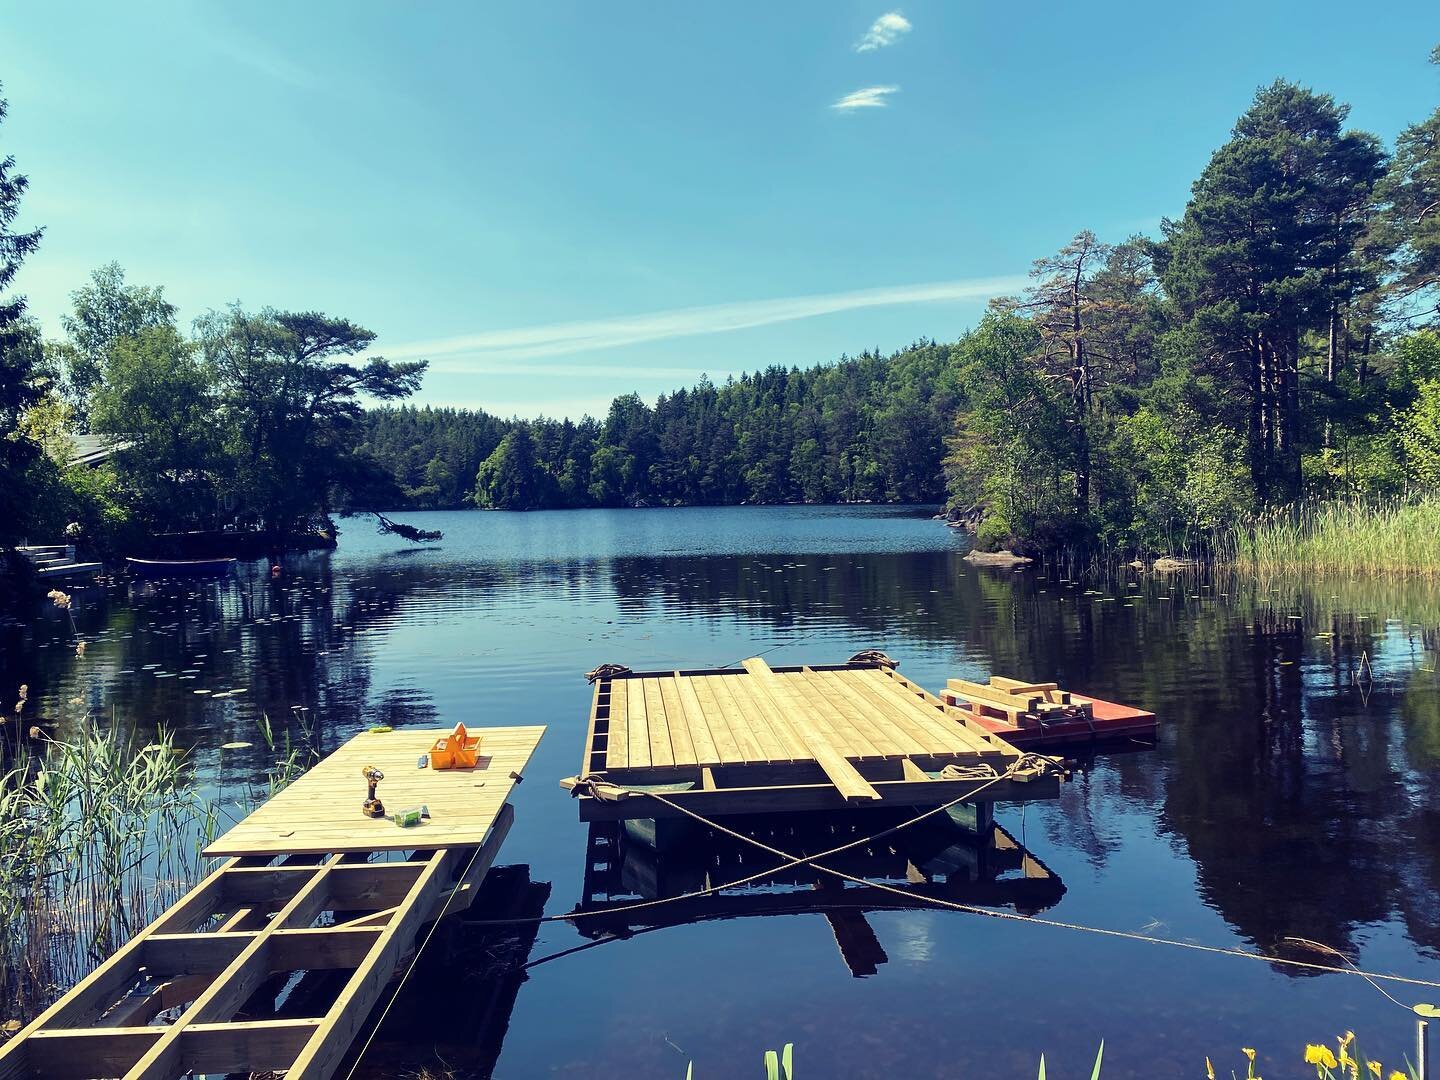 Not all projects were created equal. This project is super dreamy. Design and build floating lounge and dock in Lerum, Sweden. Working all day on the water in a beautiful place-luv it!!